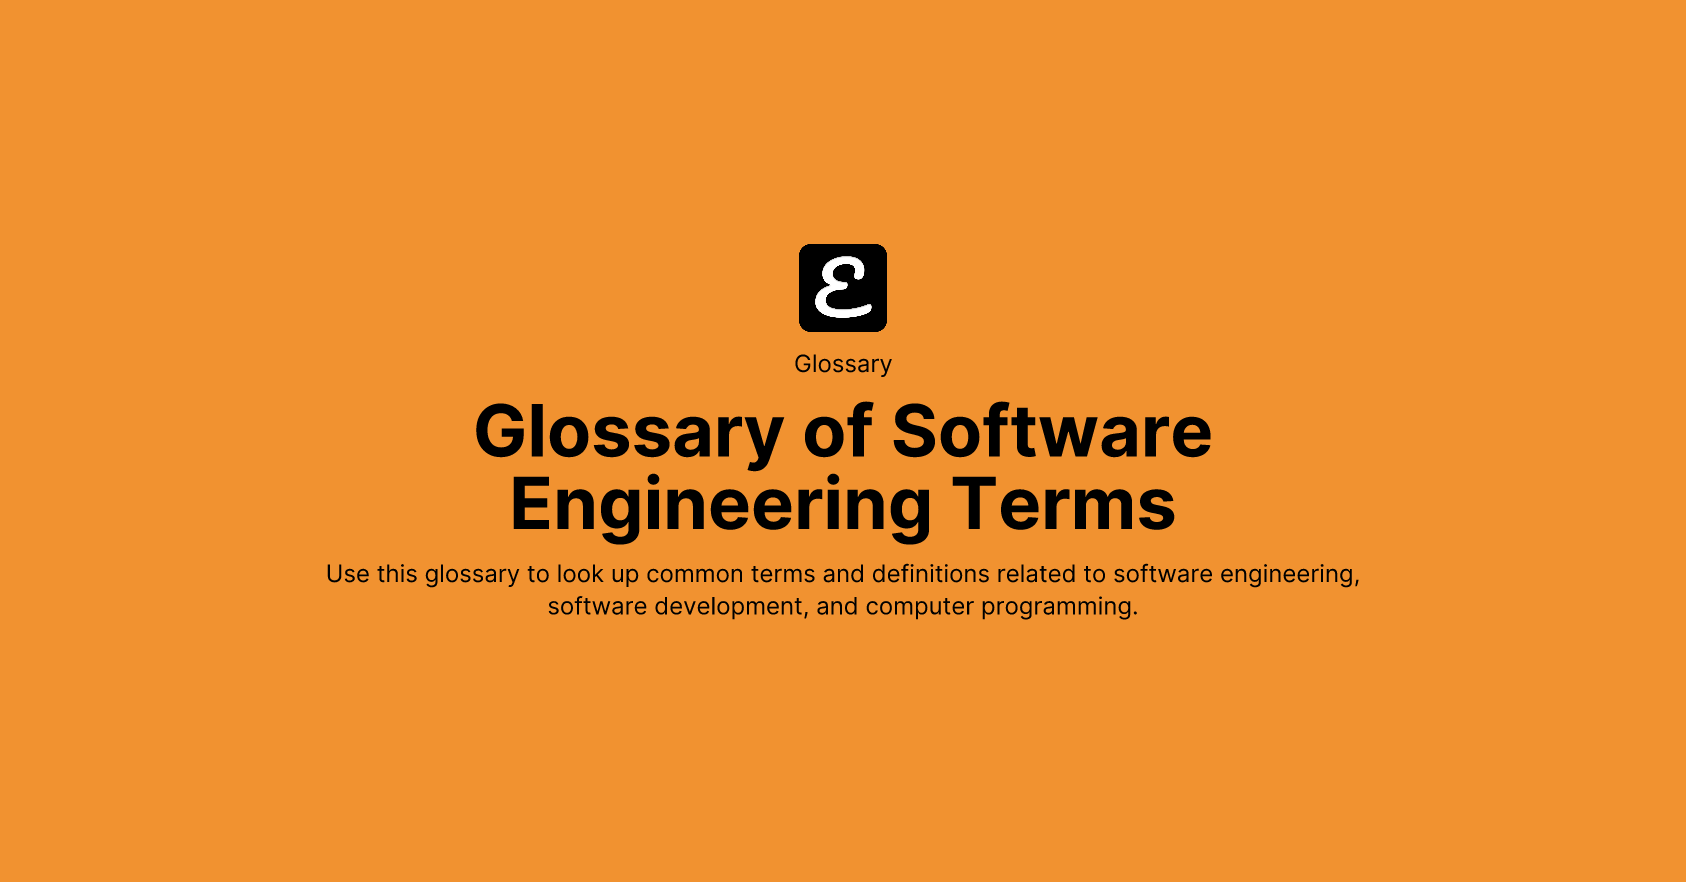 Glossary of Software Engineering Terms by Eric David Smith